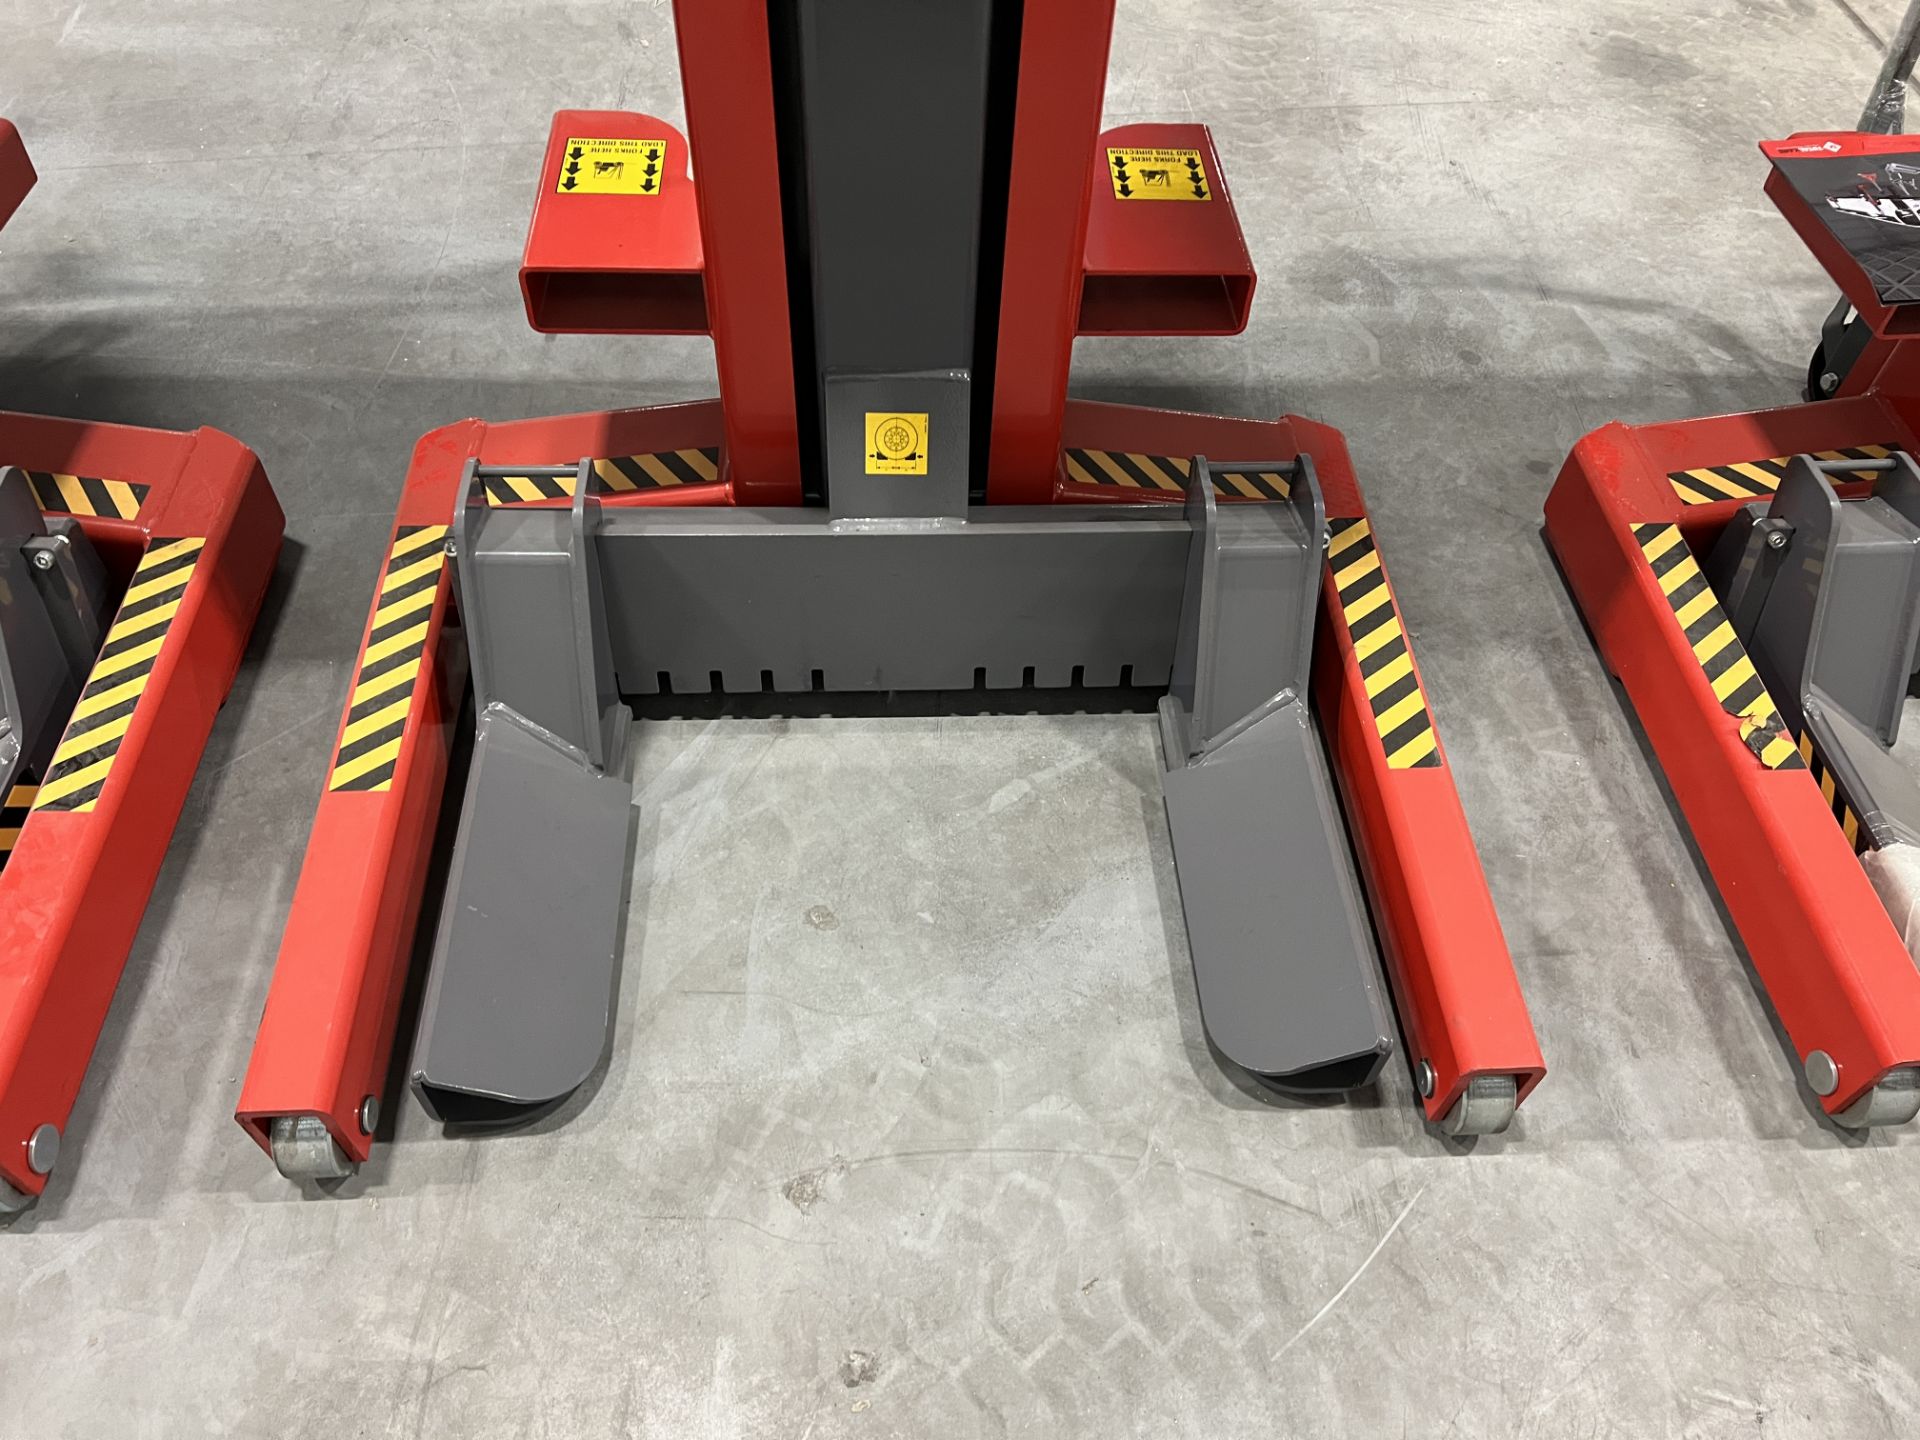 Qty 4, Totalkare T8DC cable free mobile column vehicle lifts, S/No. 012239/4, 012239/3, 012239/2, - Image 11 of 18